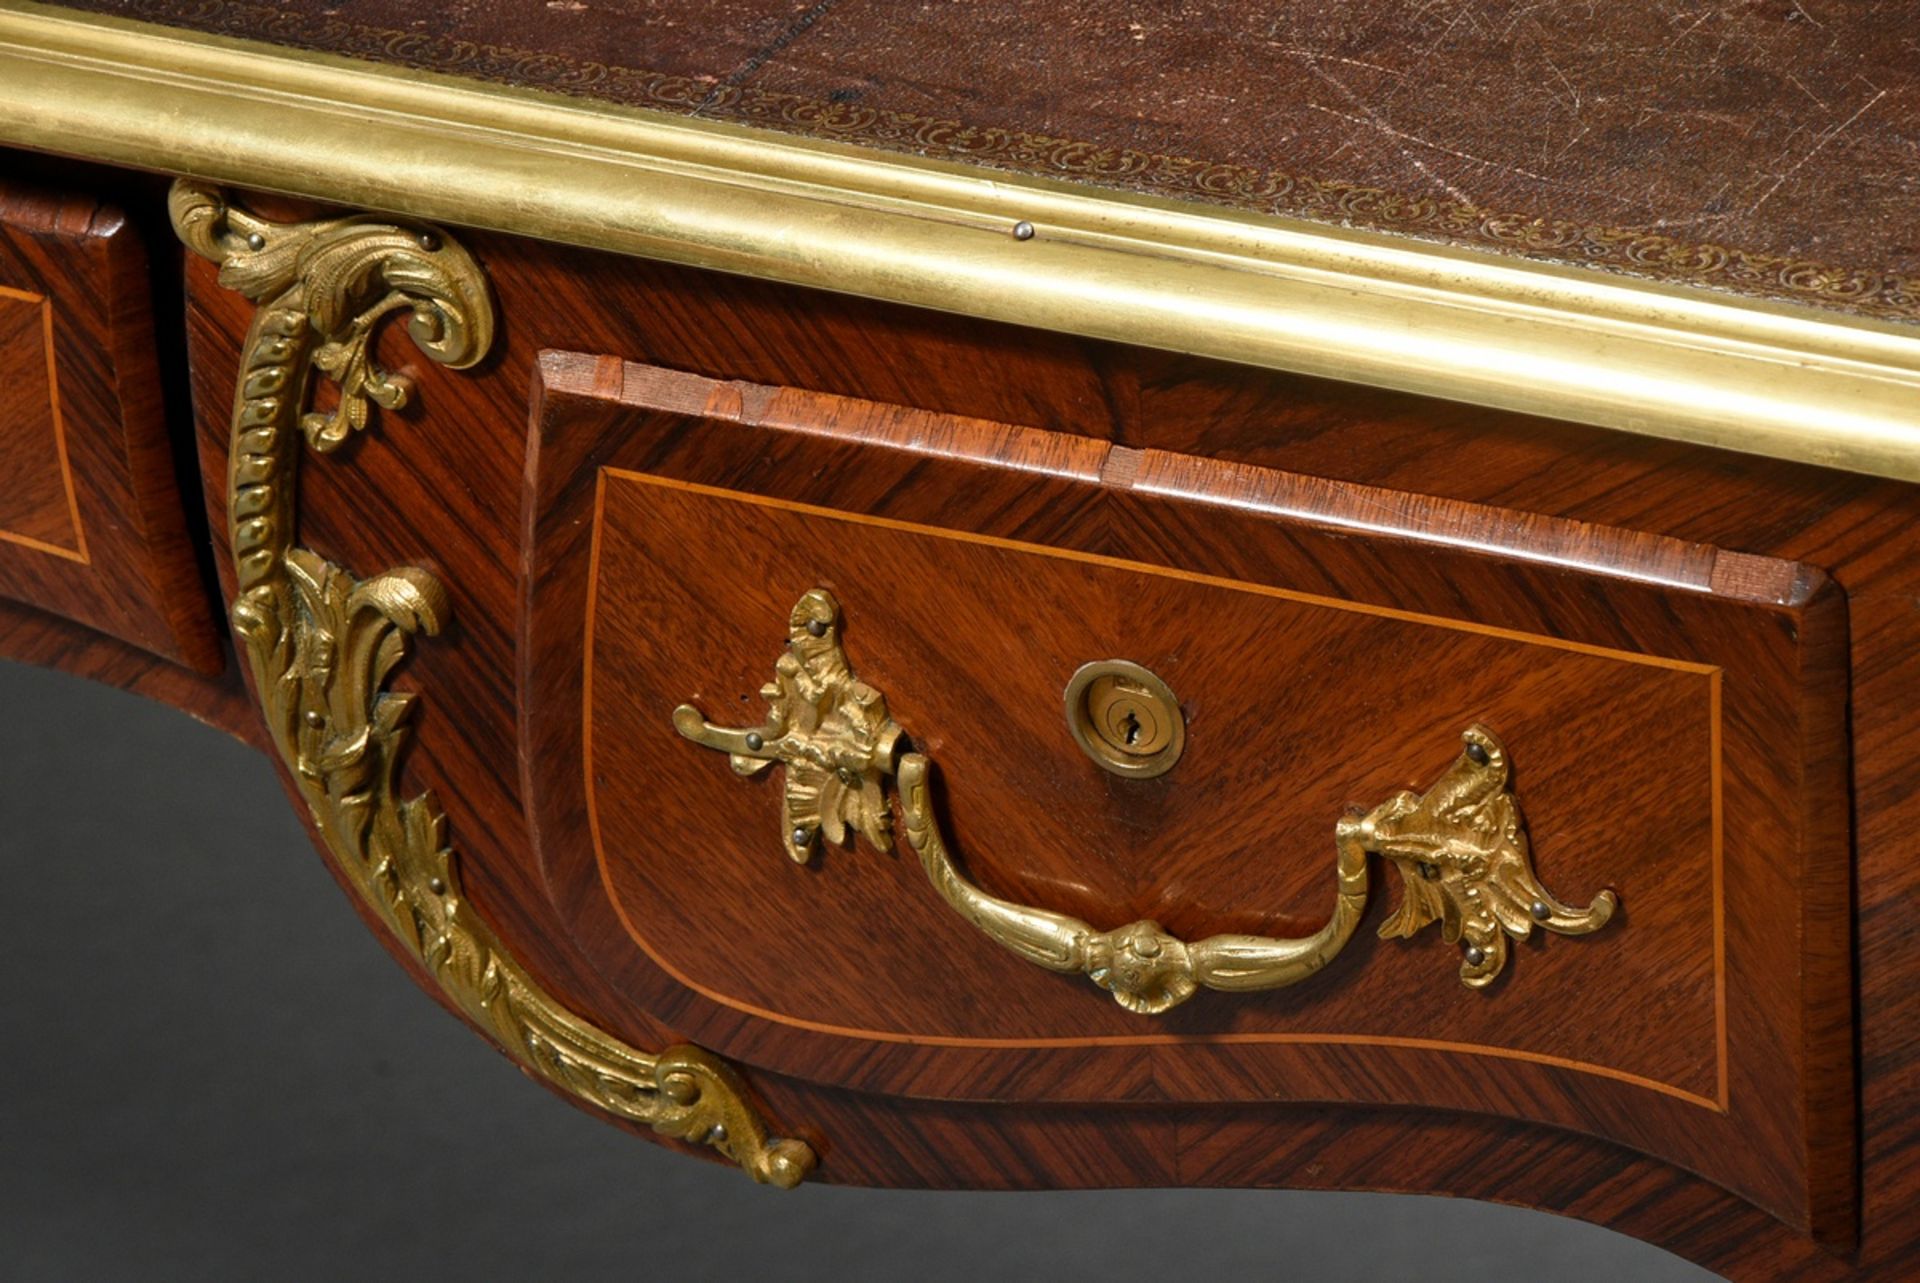 French bureau plat in Louis XV style on high curved legs with rich bronze fittings "busts of women" - Image 3 of 10